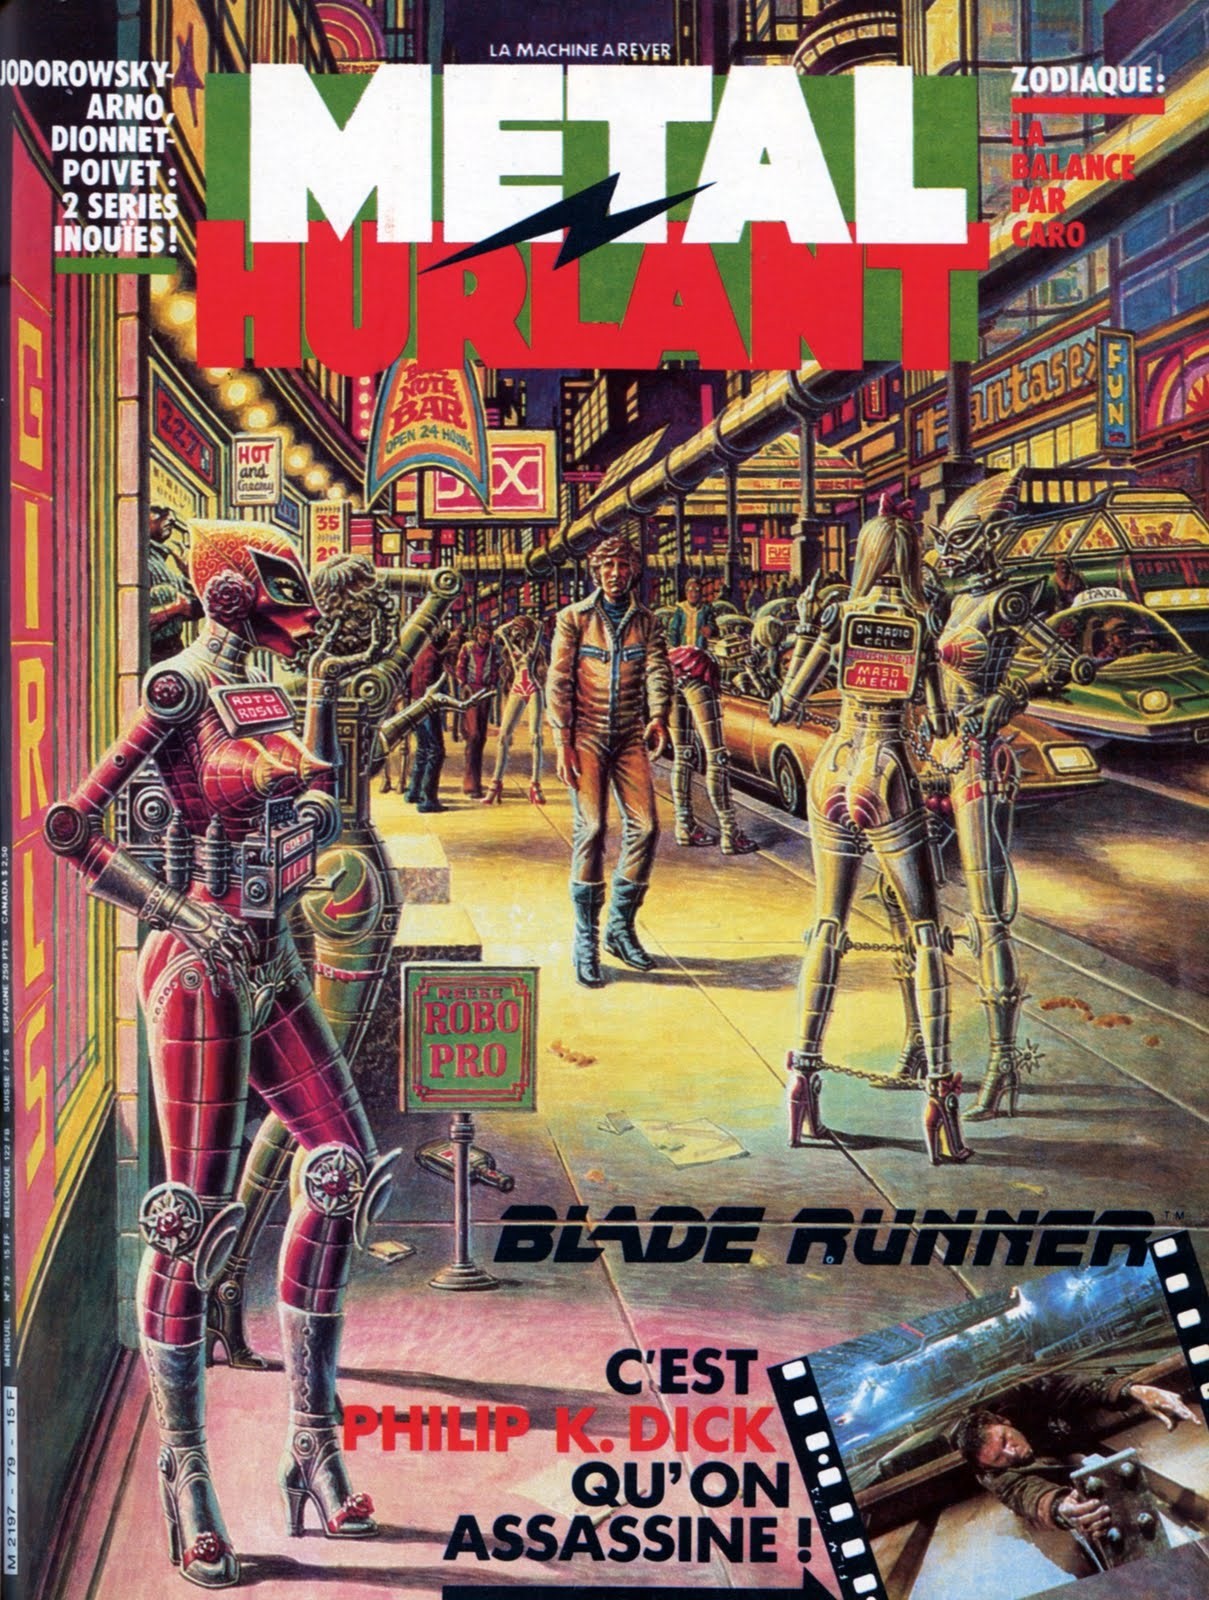 French 70s Porn Comic - The French sci-fi comic that inspired Blade Runner and Akira | Dazed